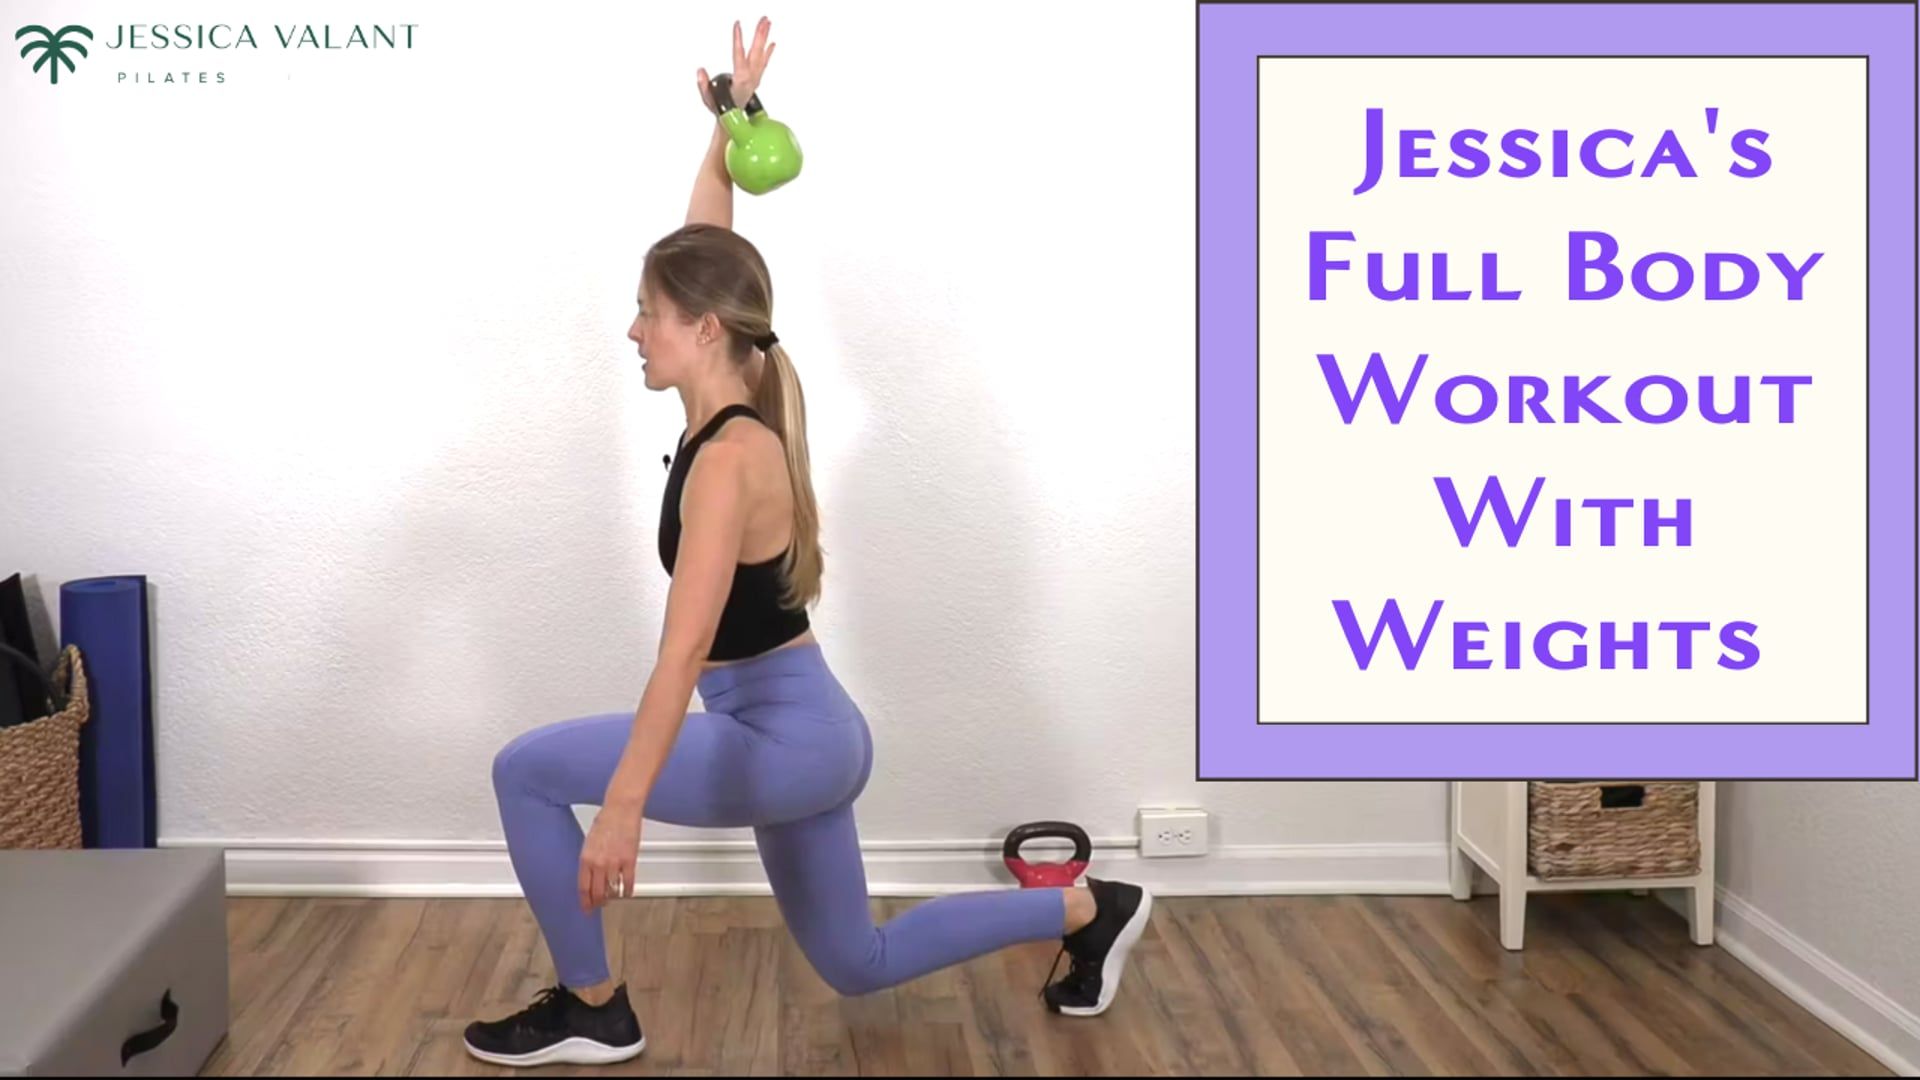 Jessica's Full Body Workout with Weights - Jessica Valant Pilates